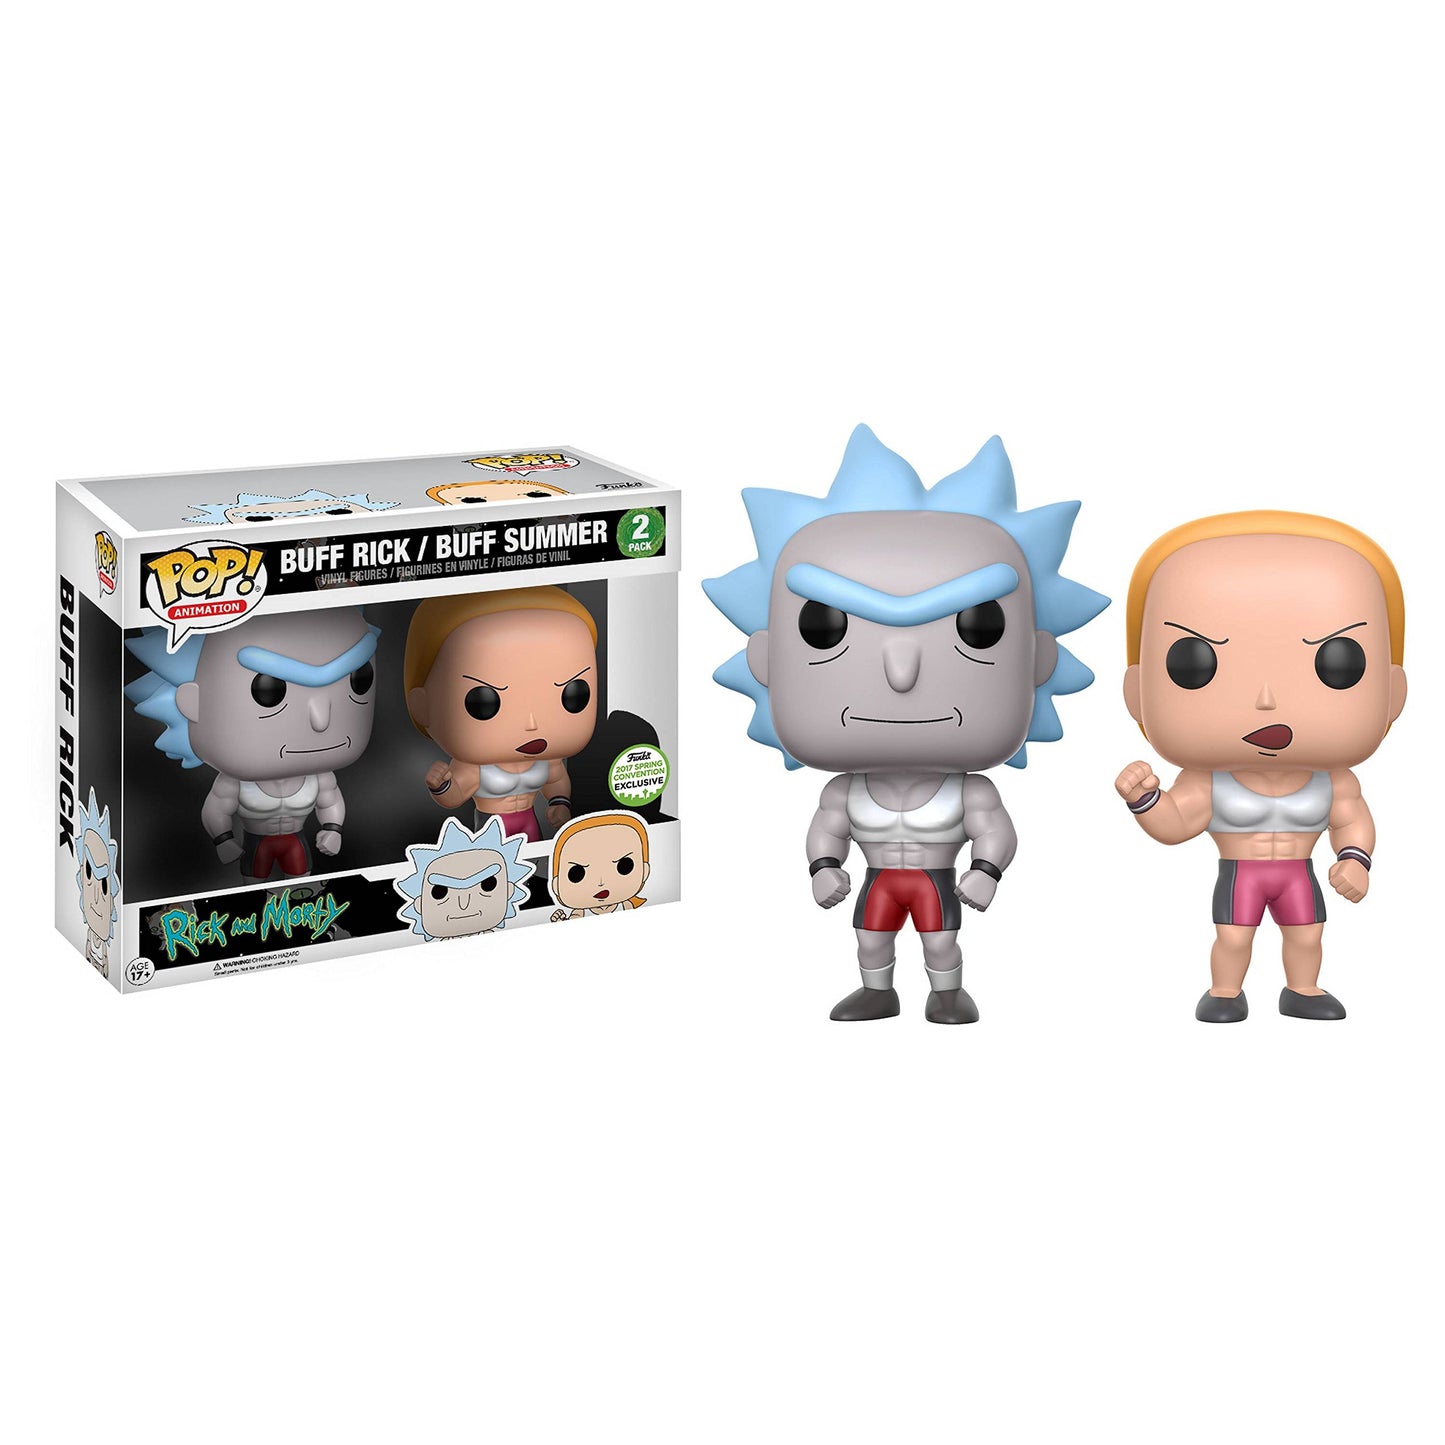 Funko POP! Animation Rick and Morty 2pk Vinyl Buff Rick/Buff Summer (ECCC Spring Convention Exclusive)